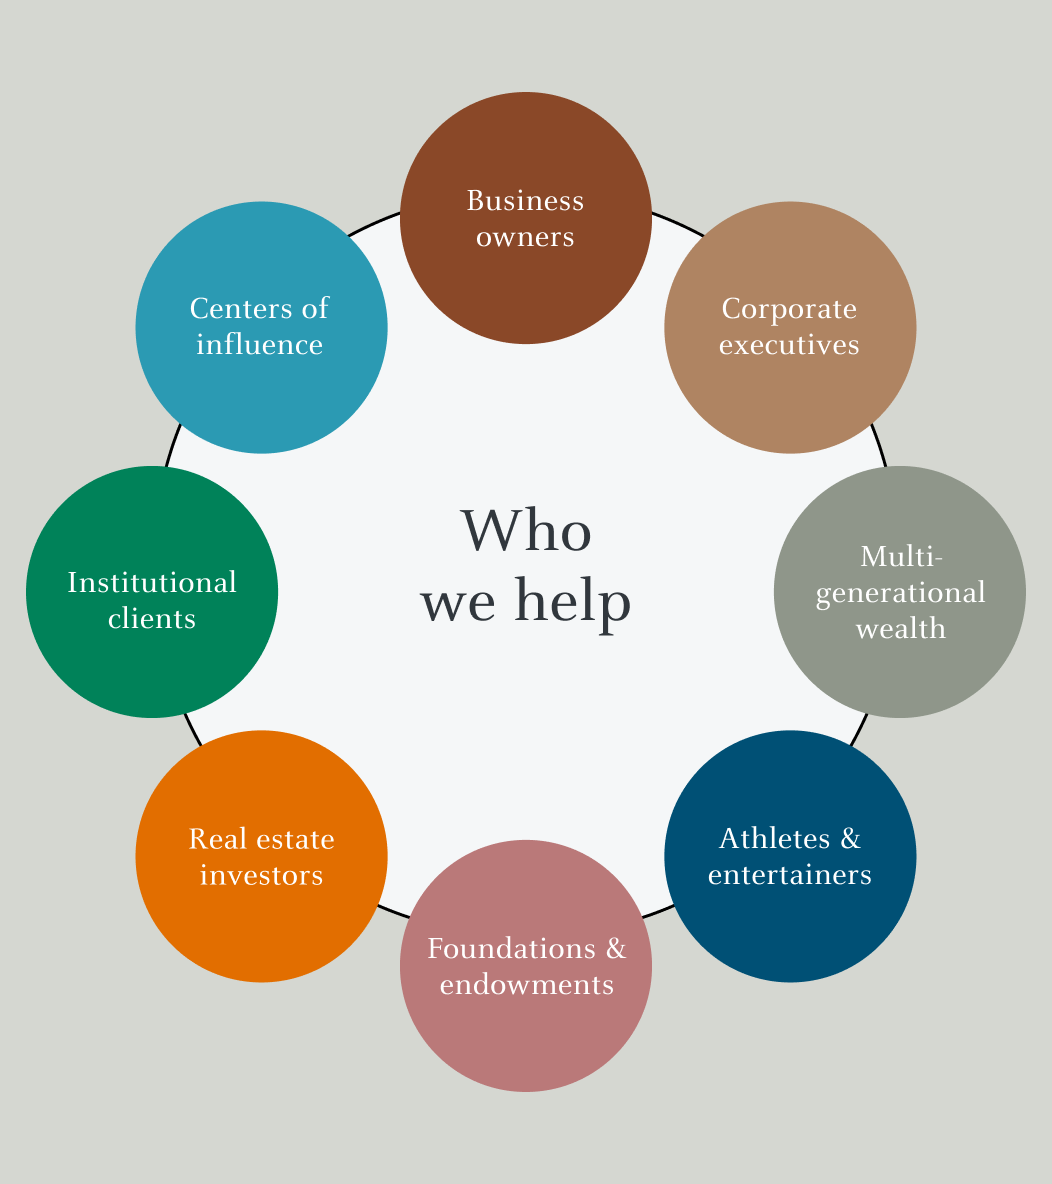 Who we help. Business owners. Corporate executives. Multi generational wealth. athletes and entertainers. foundations  and endowments. real estate investores. institutional clients. centers of influence